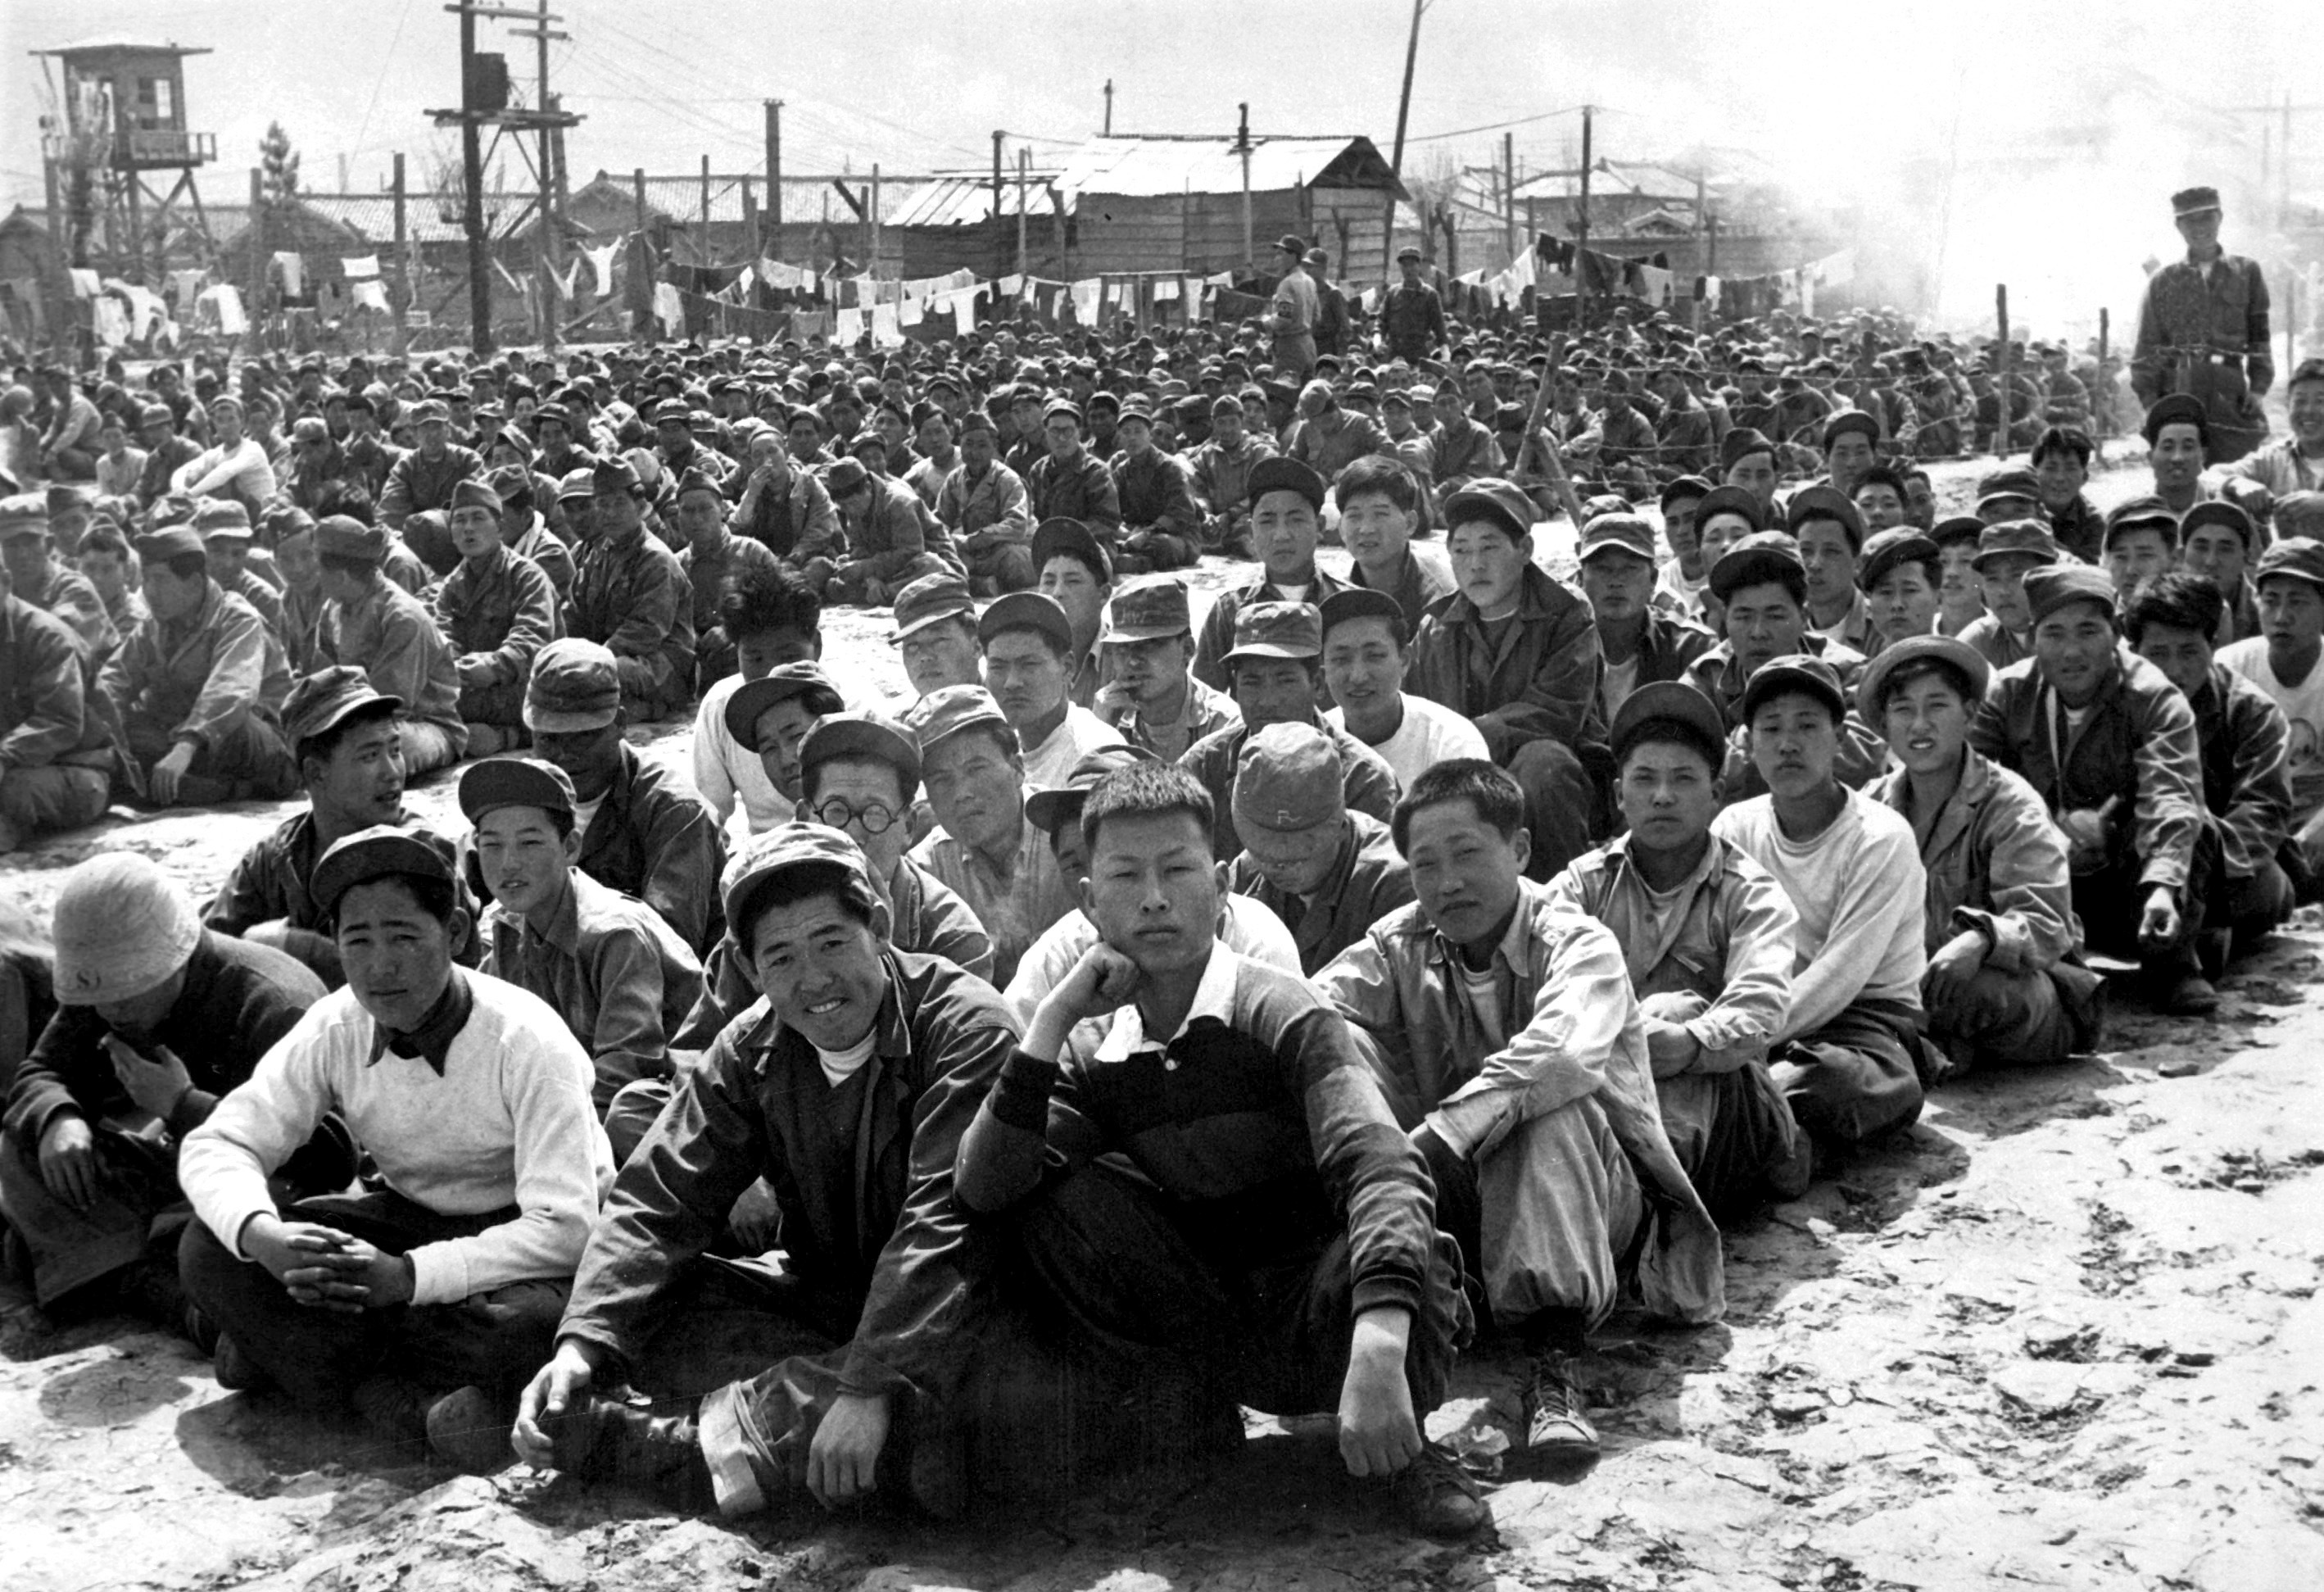 America had unconstitutional internment camps as recently as the 1940s – how likely will they arise again?